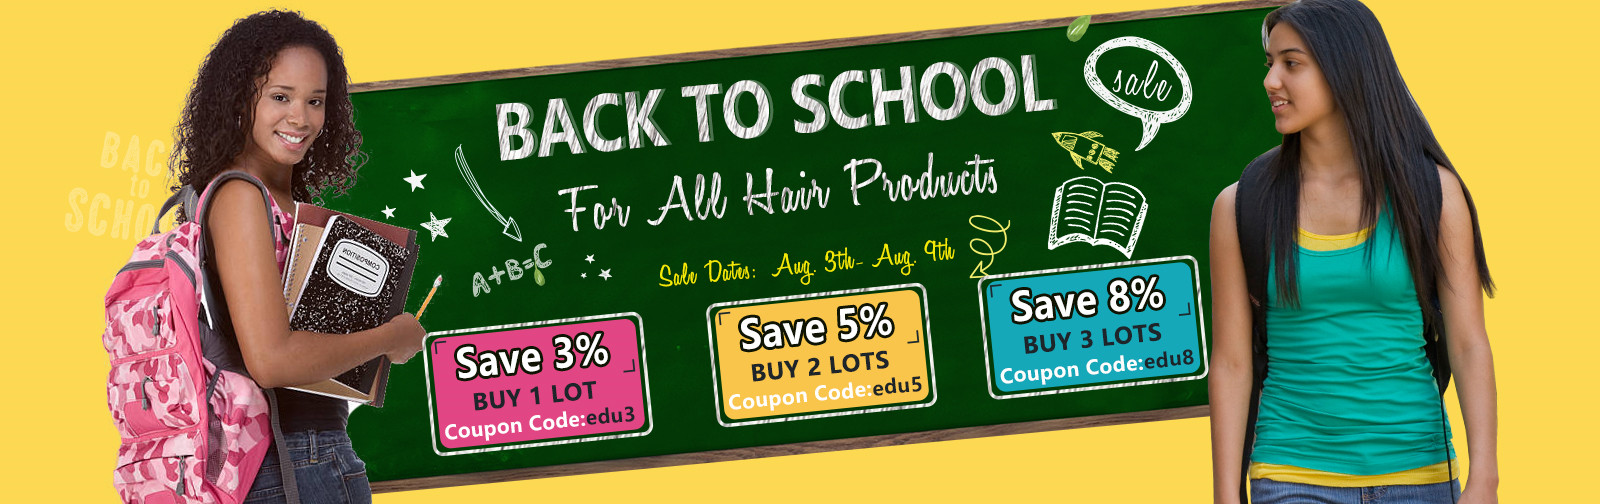 back t to school promotion